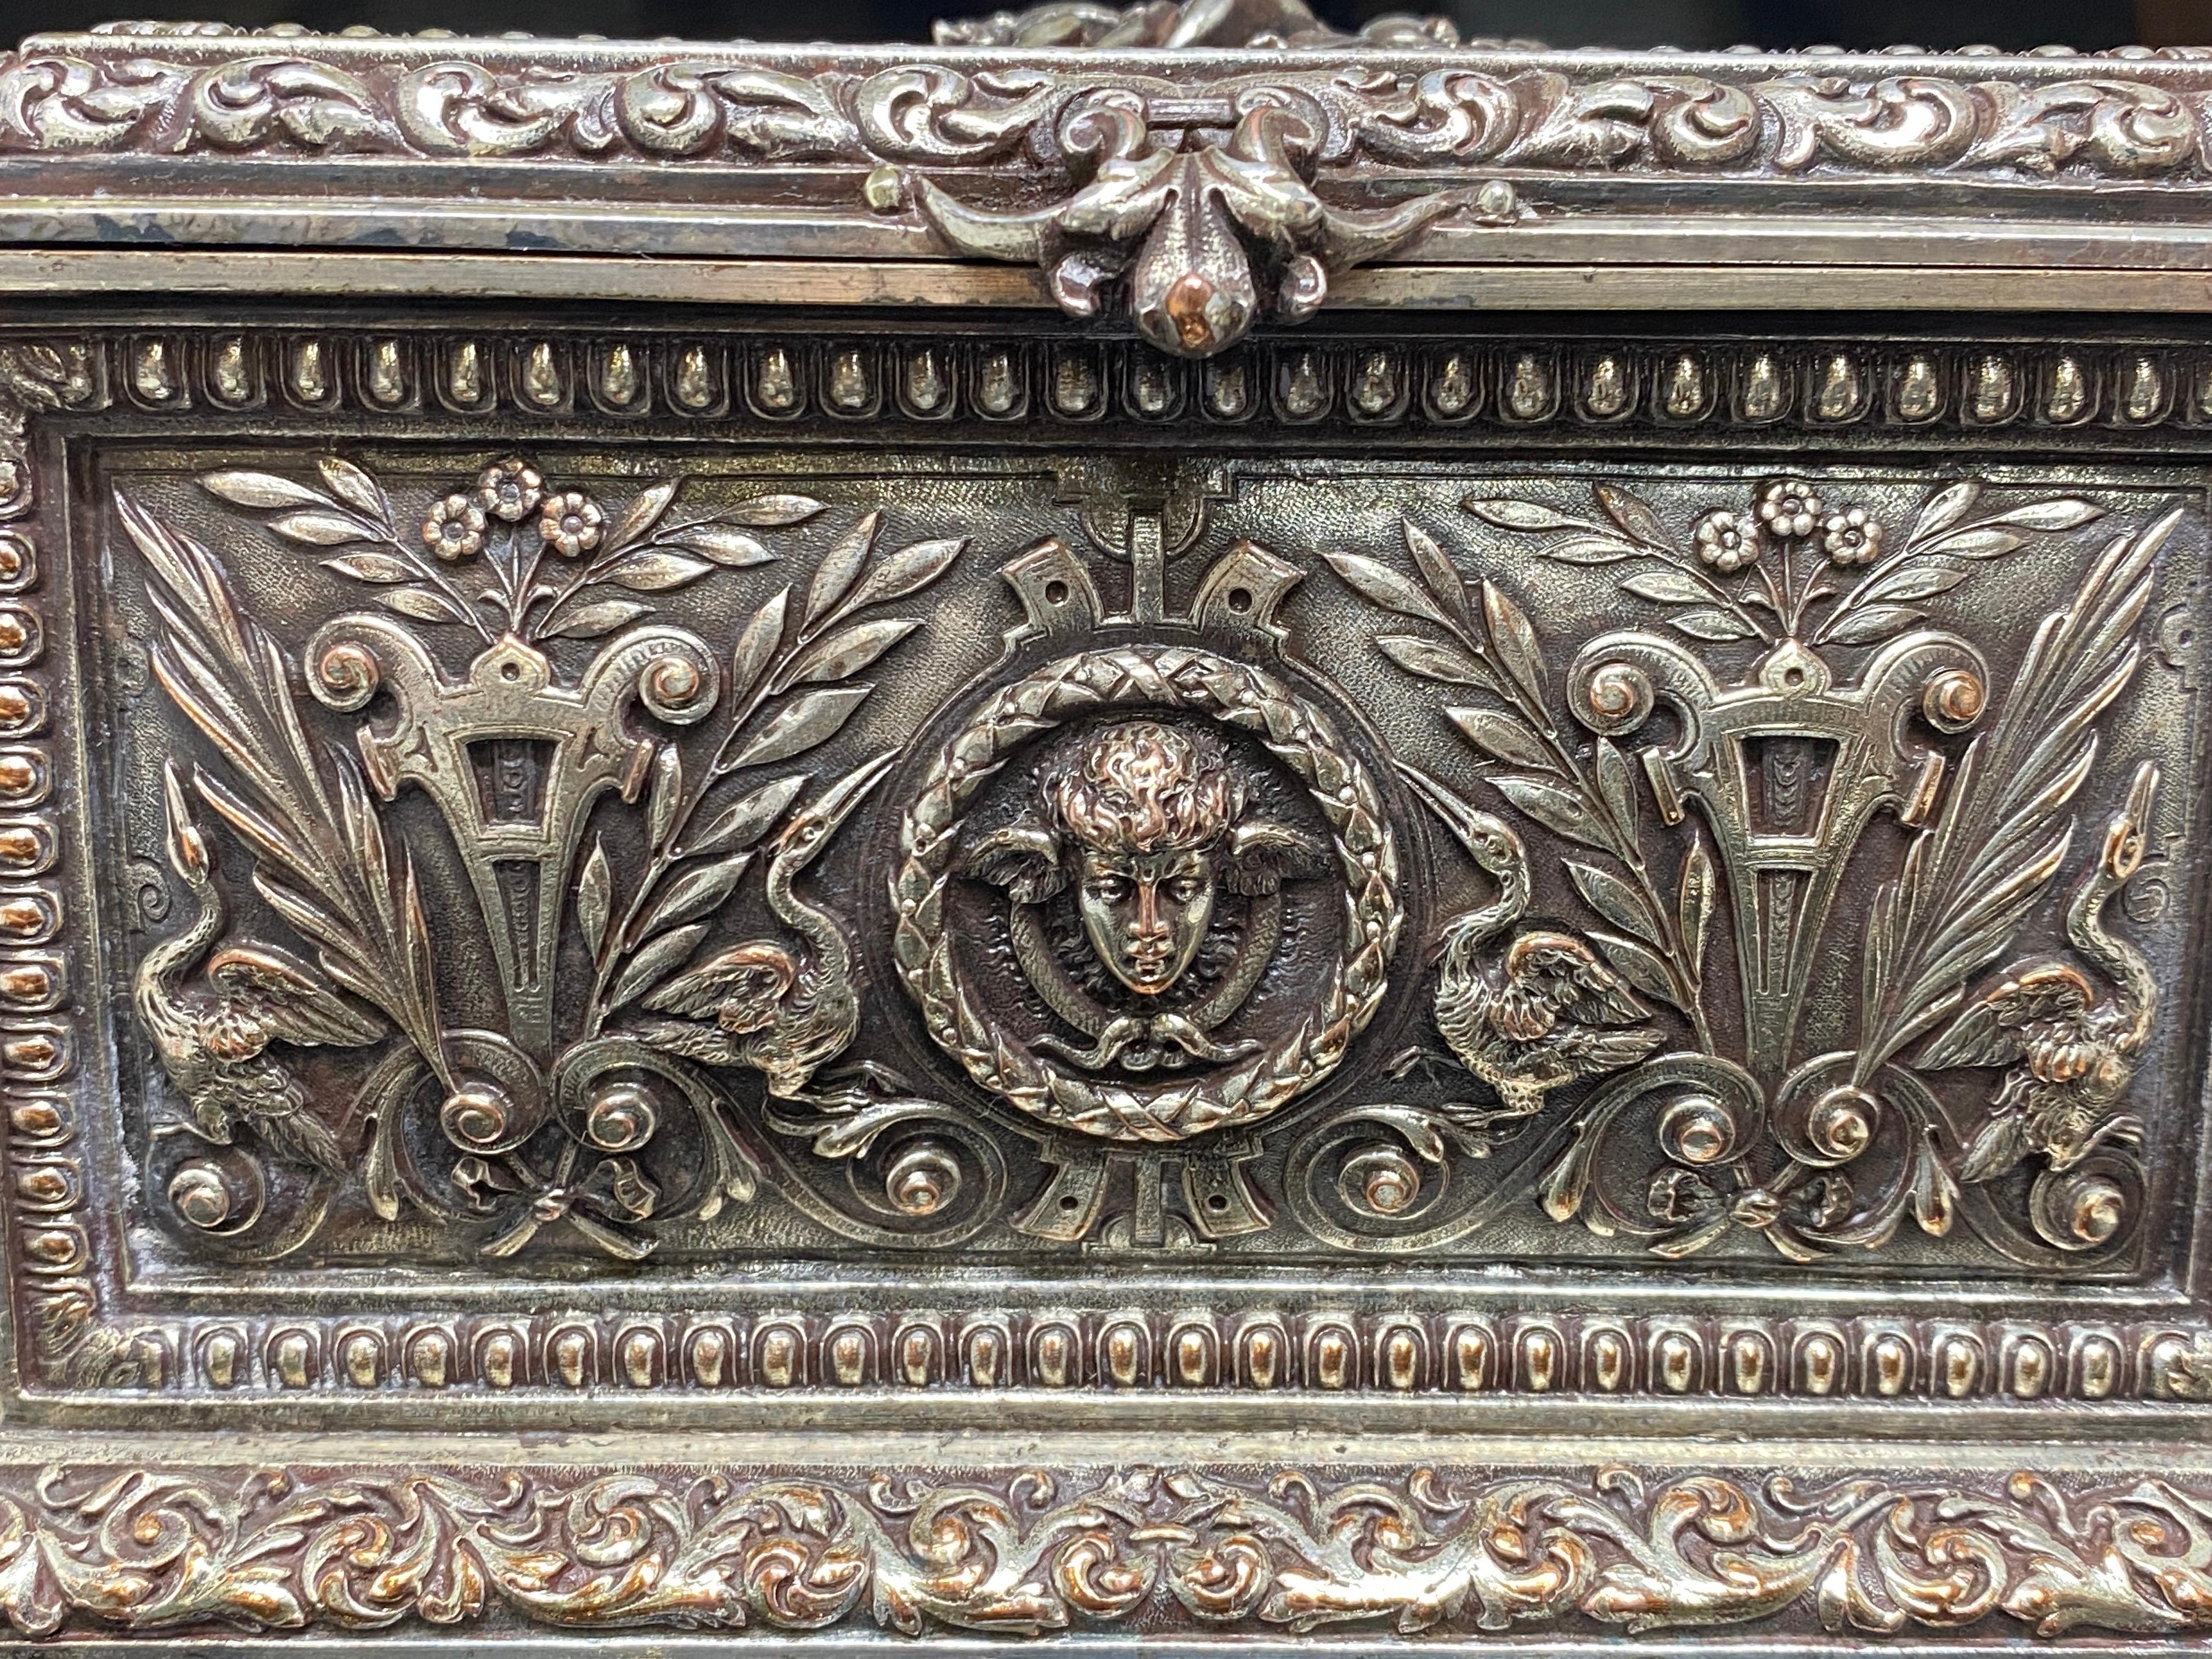 19th C Antique Silvered Bronze Silverplated Hinged Box, Trinket Jewelry Casket For Sale 9